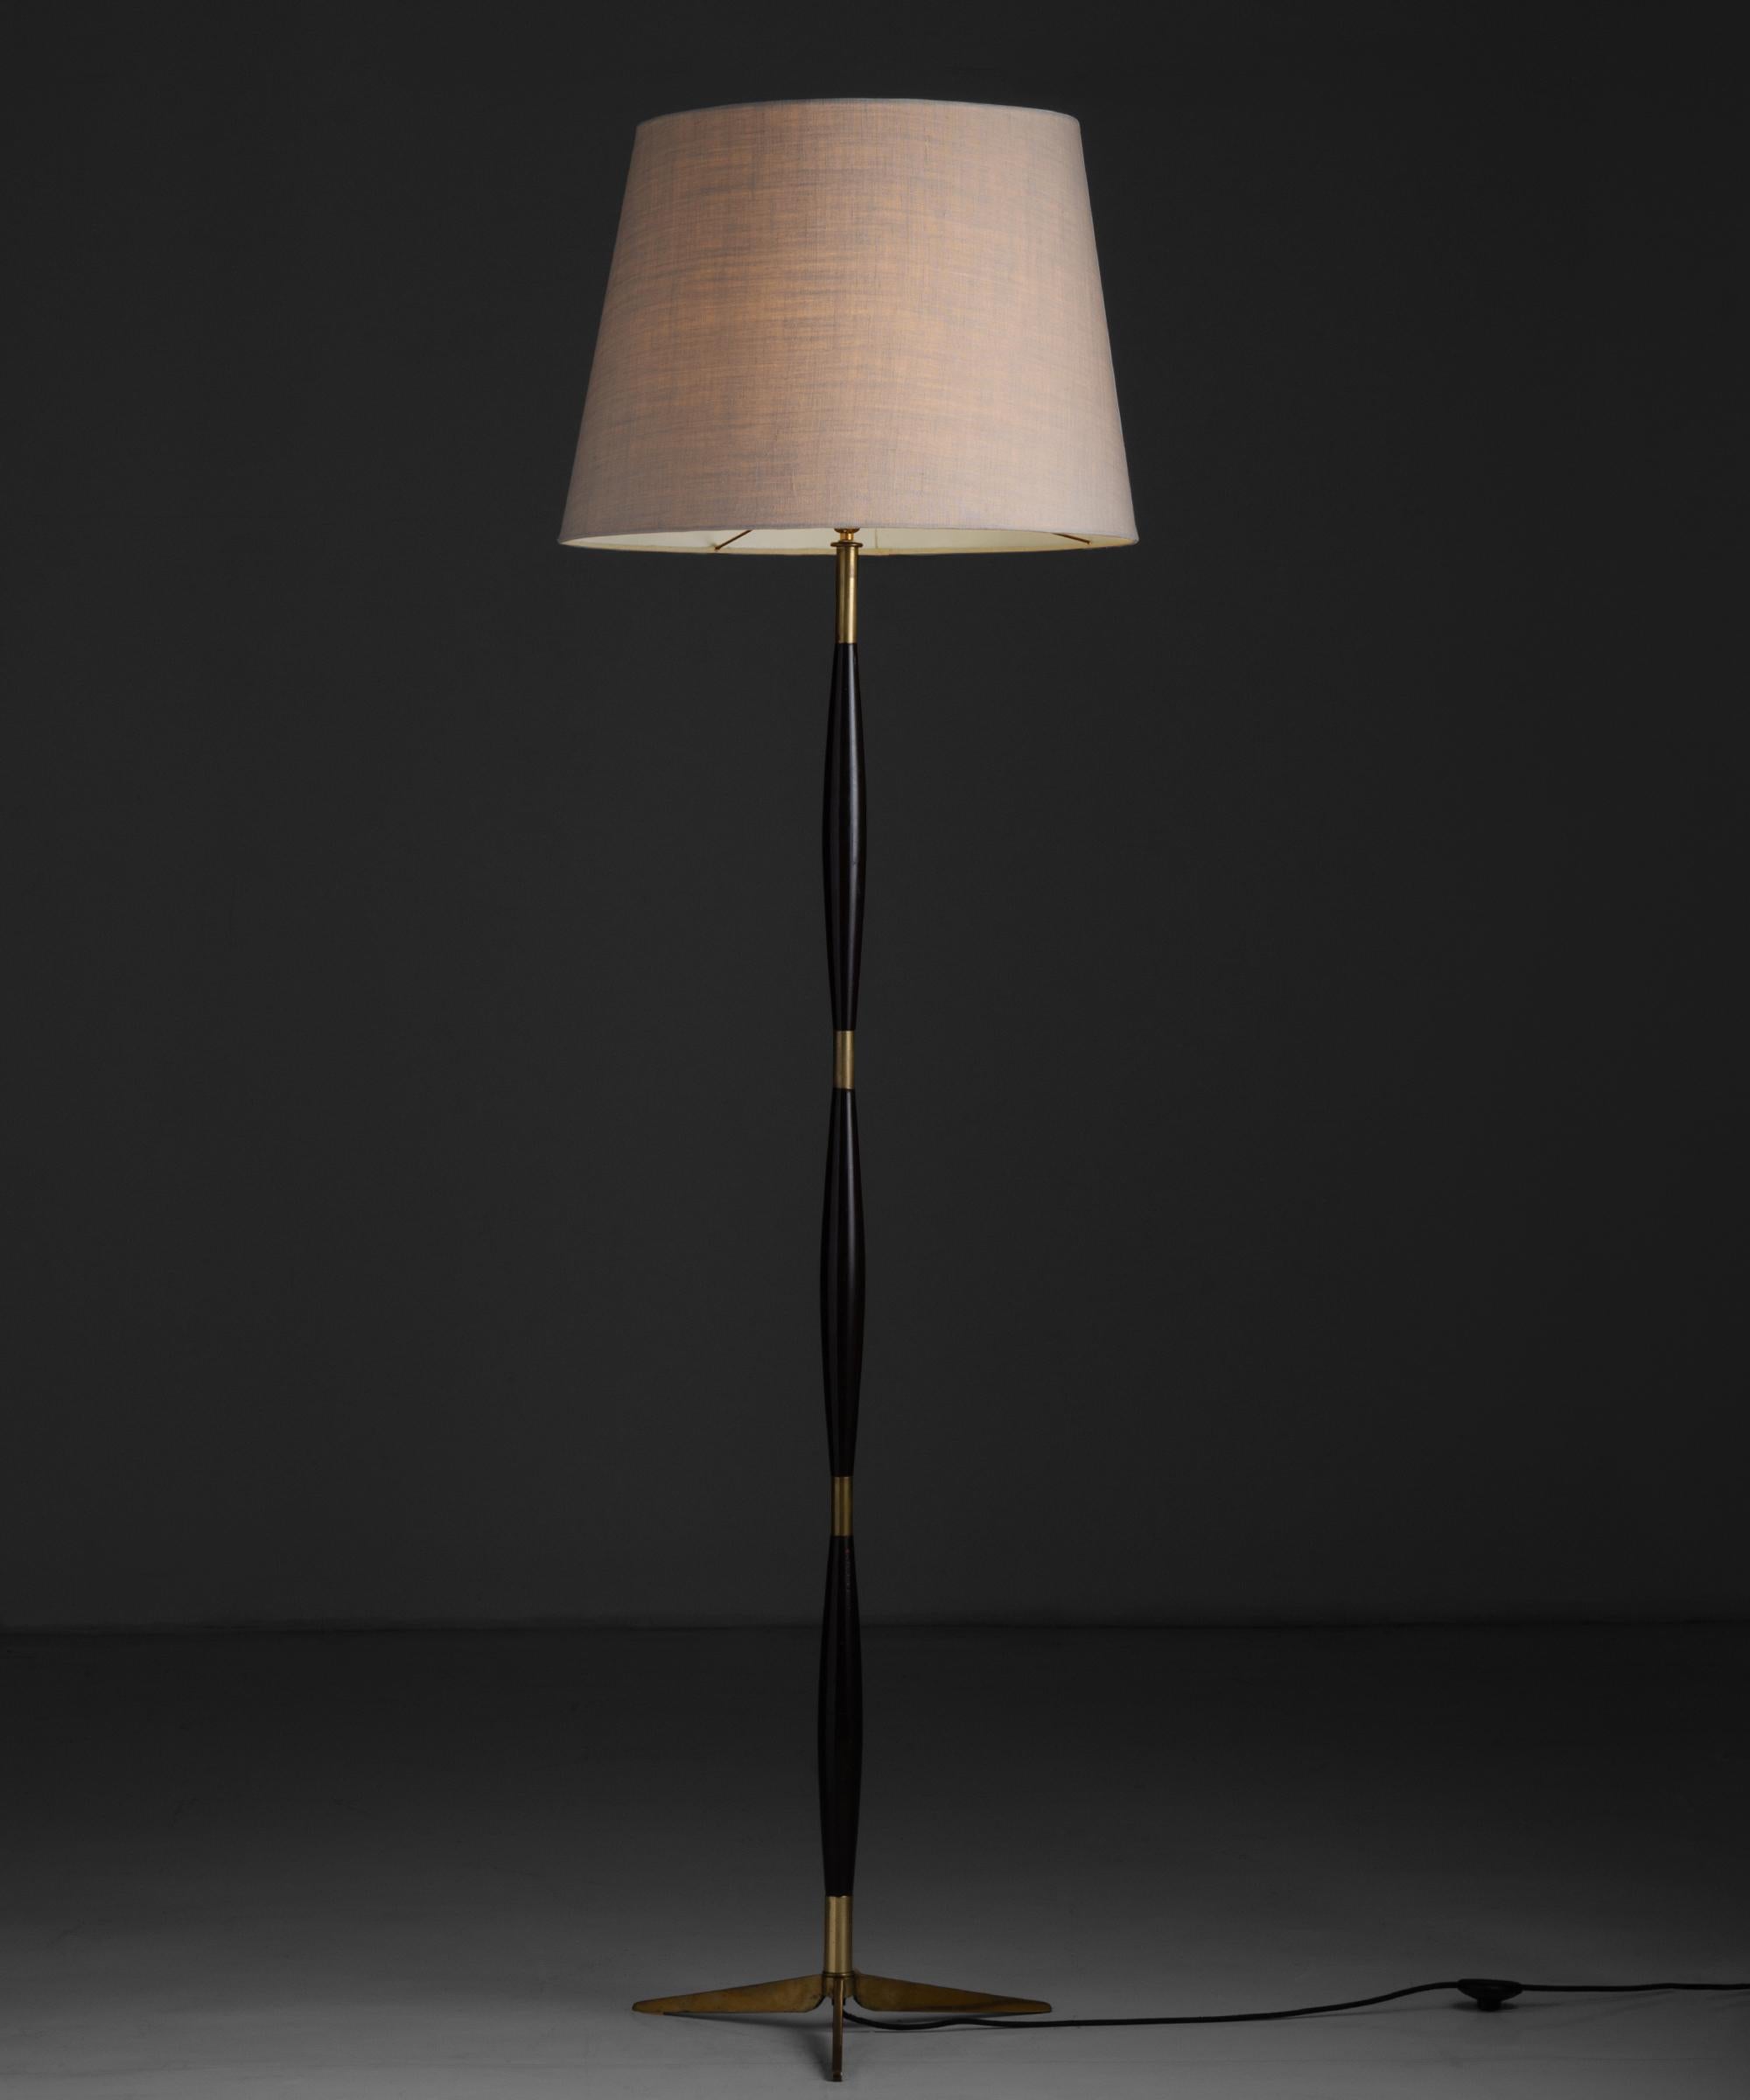 Modern Italian Floor Lamp, circa 1960

Elegant black stem with brass base and clasps. New linen shade.

Measures 24”dia x 78.5”h.